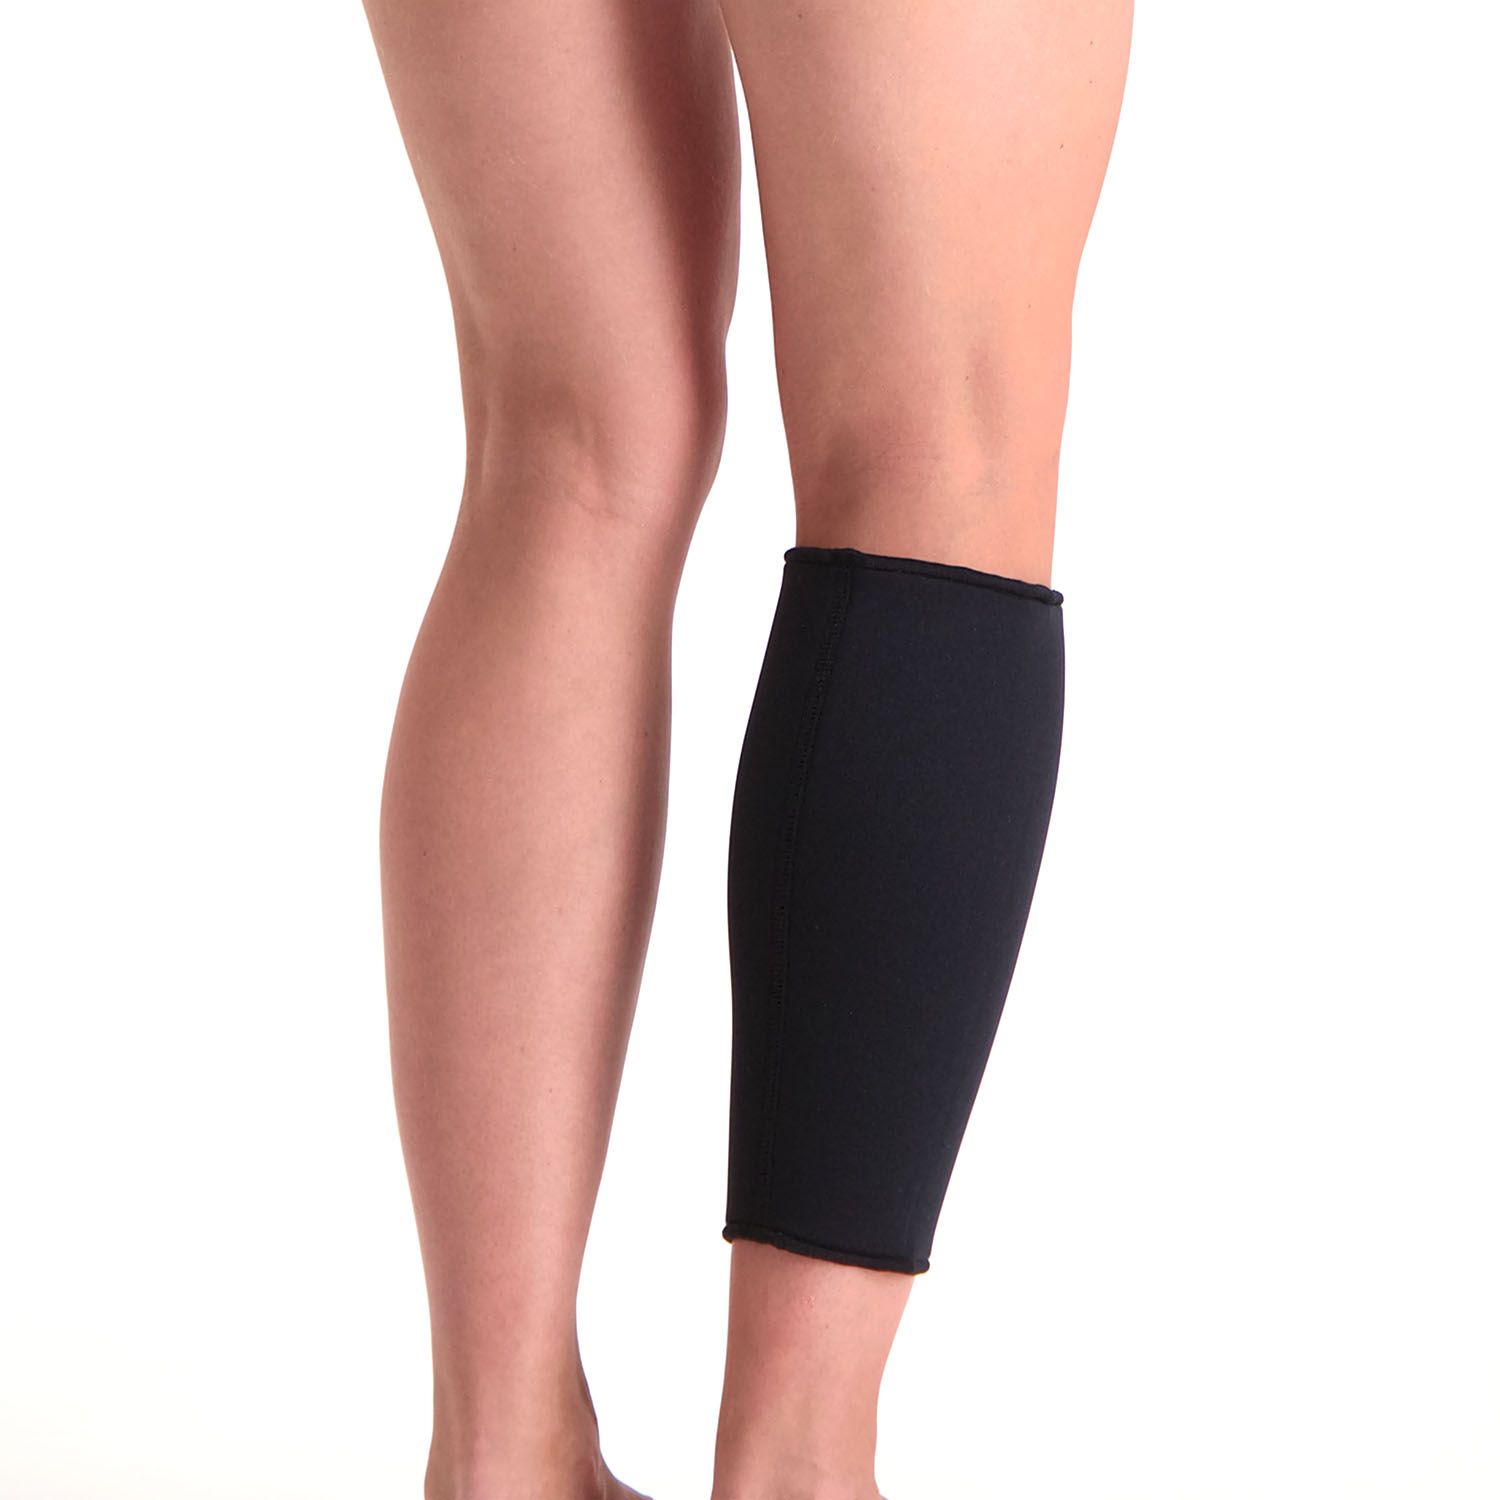 super ortho calf support from behind